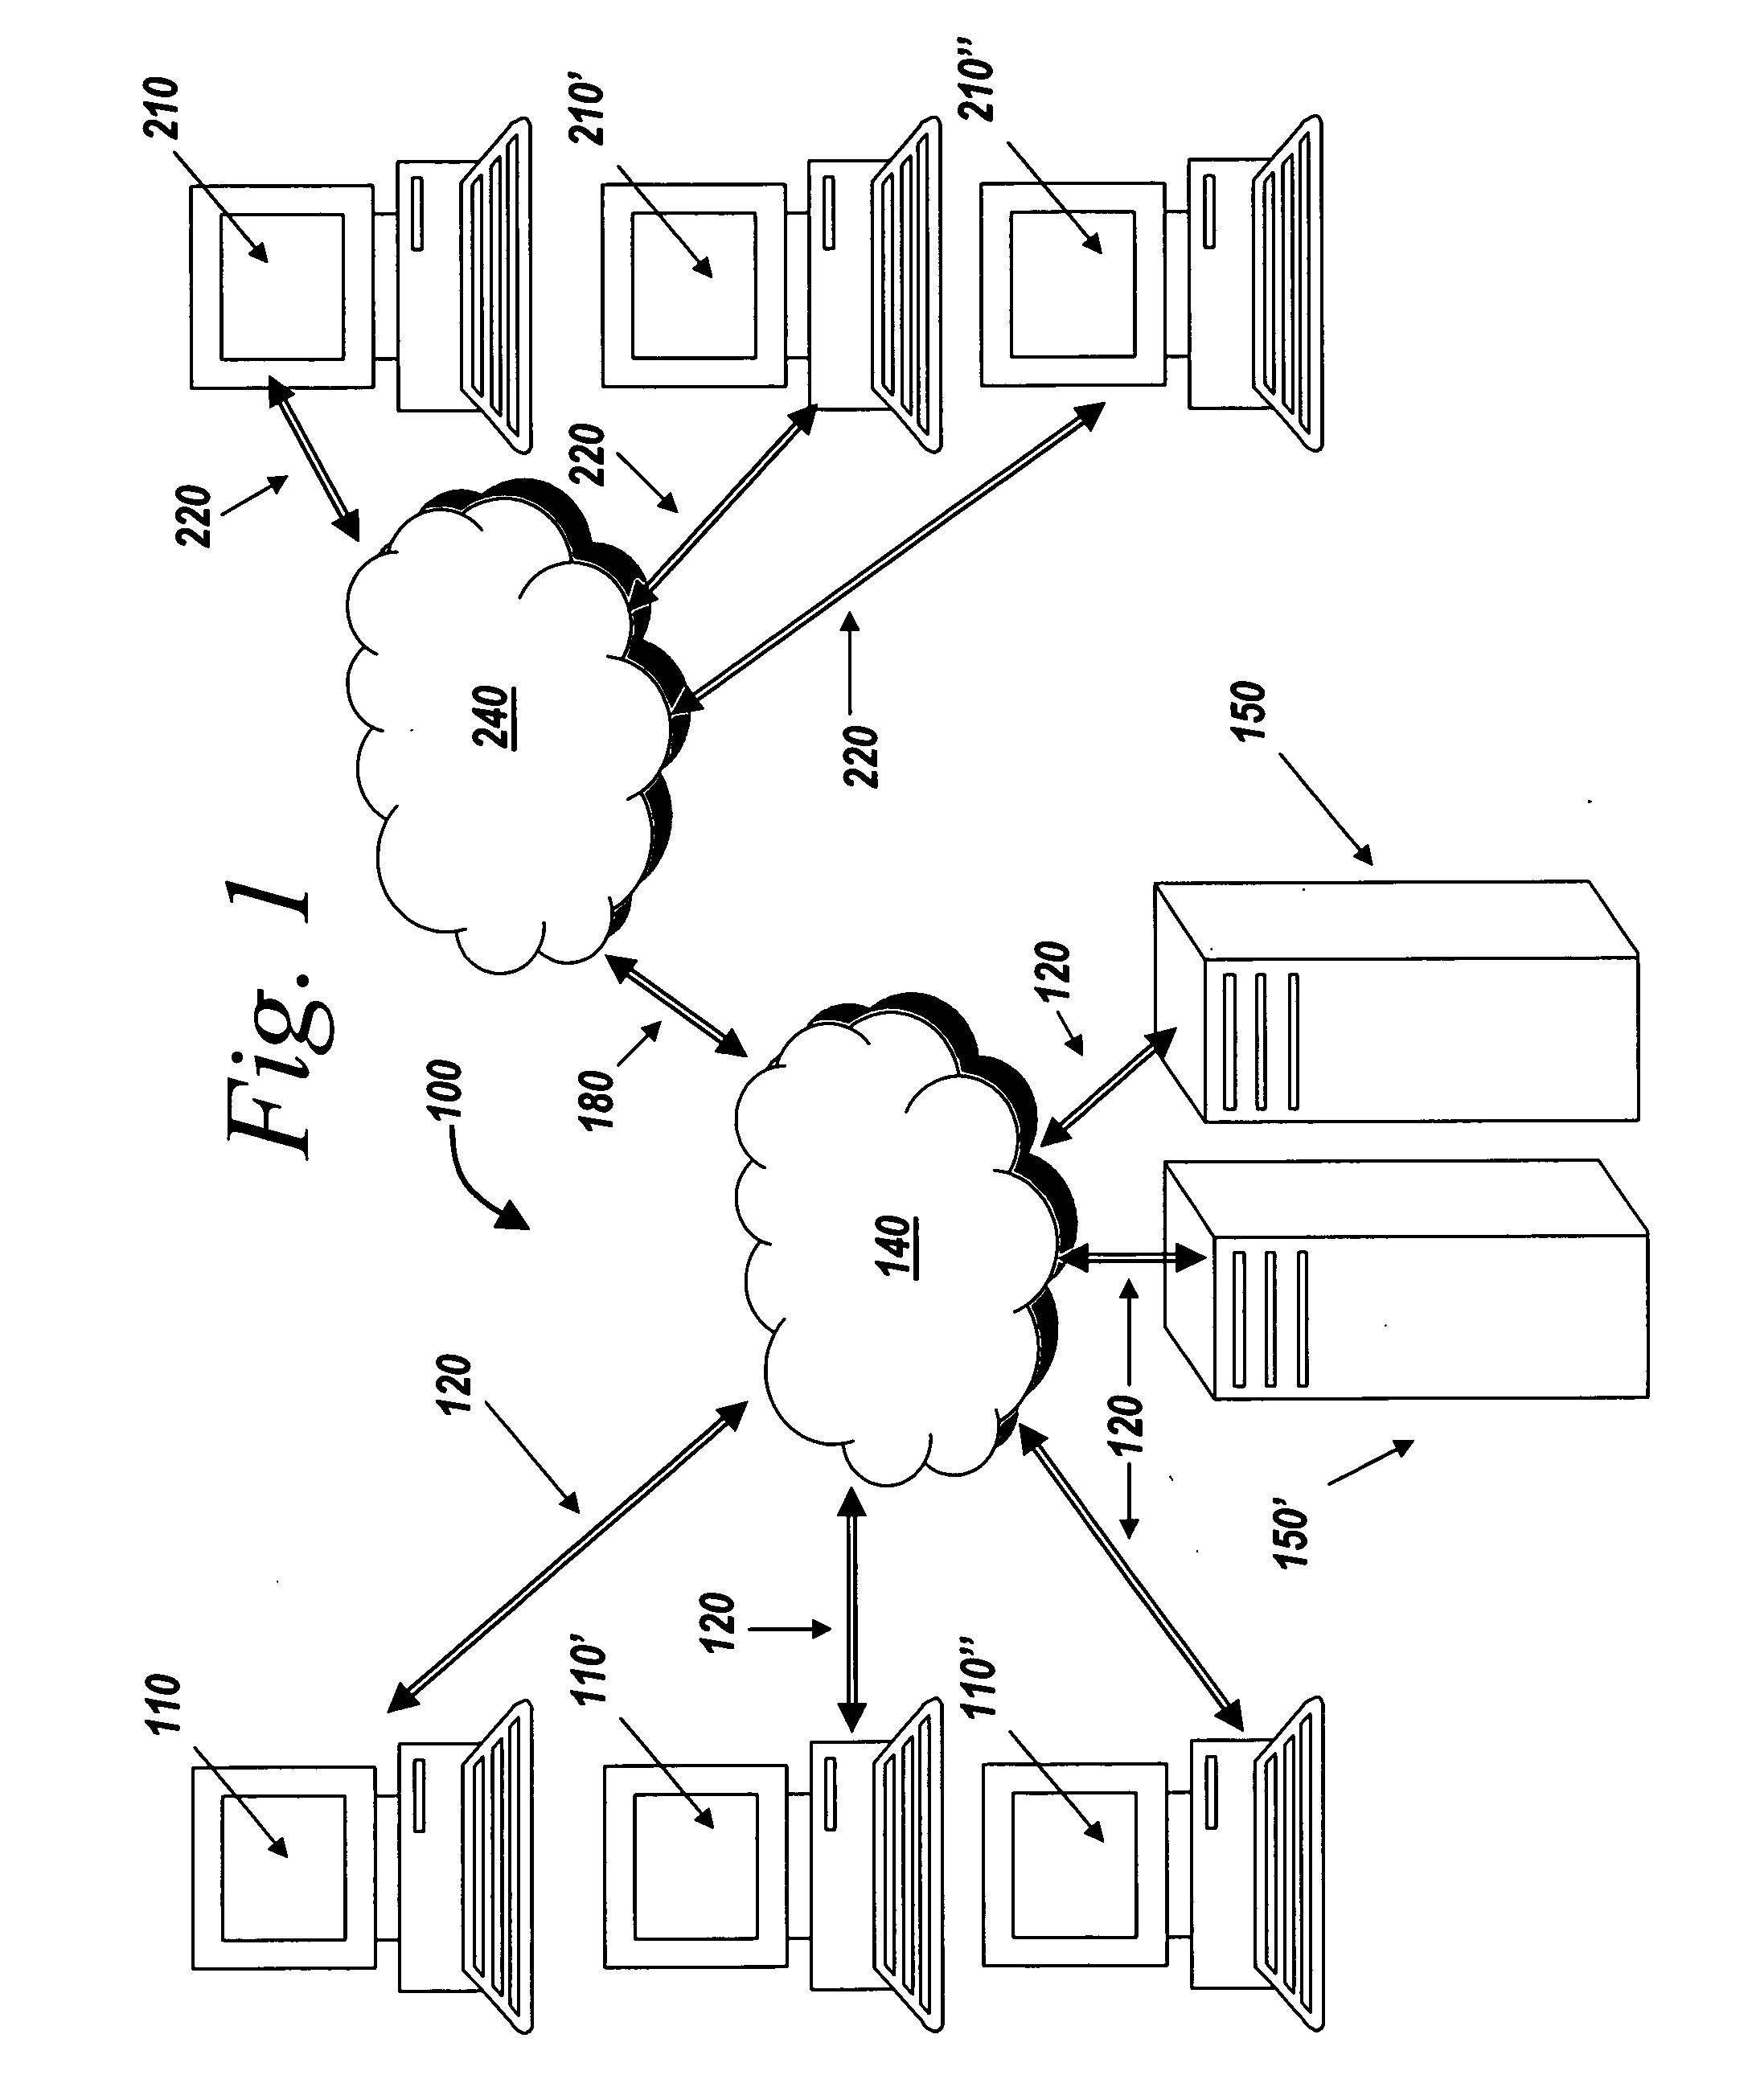 Systems and methods for dynamically adjusting a taxonomy used to categorize digital assets